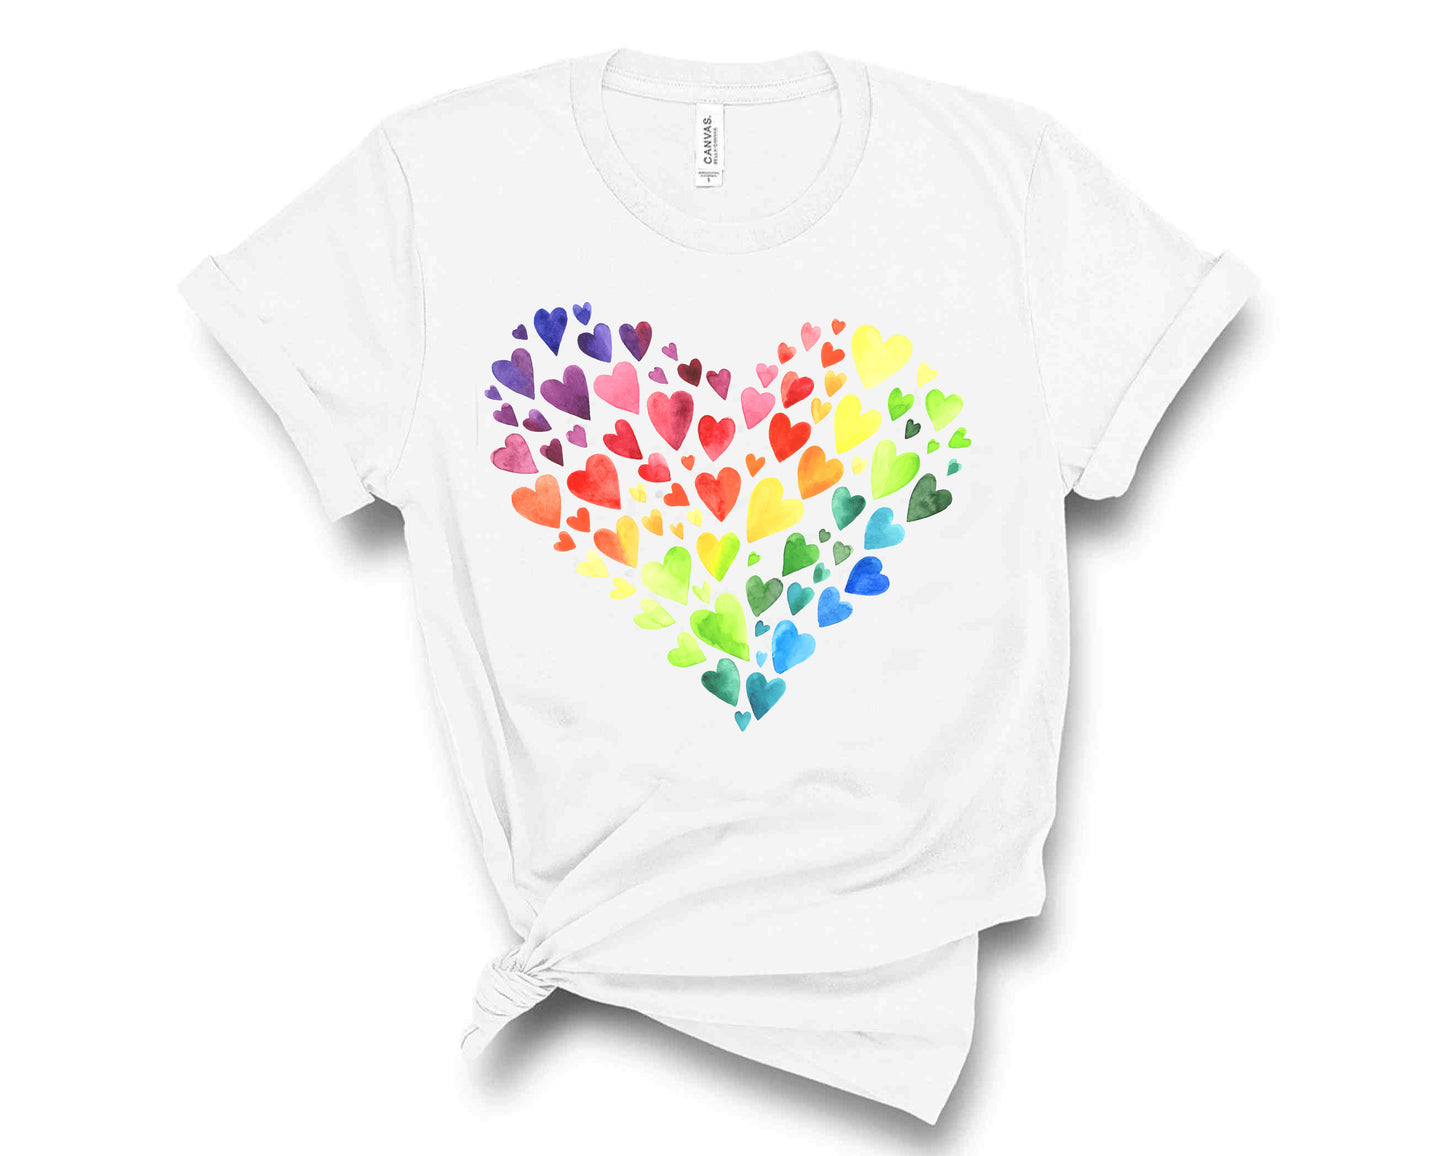 Show Your Love For All with a Rainbow . . .